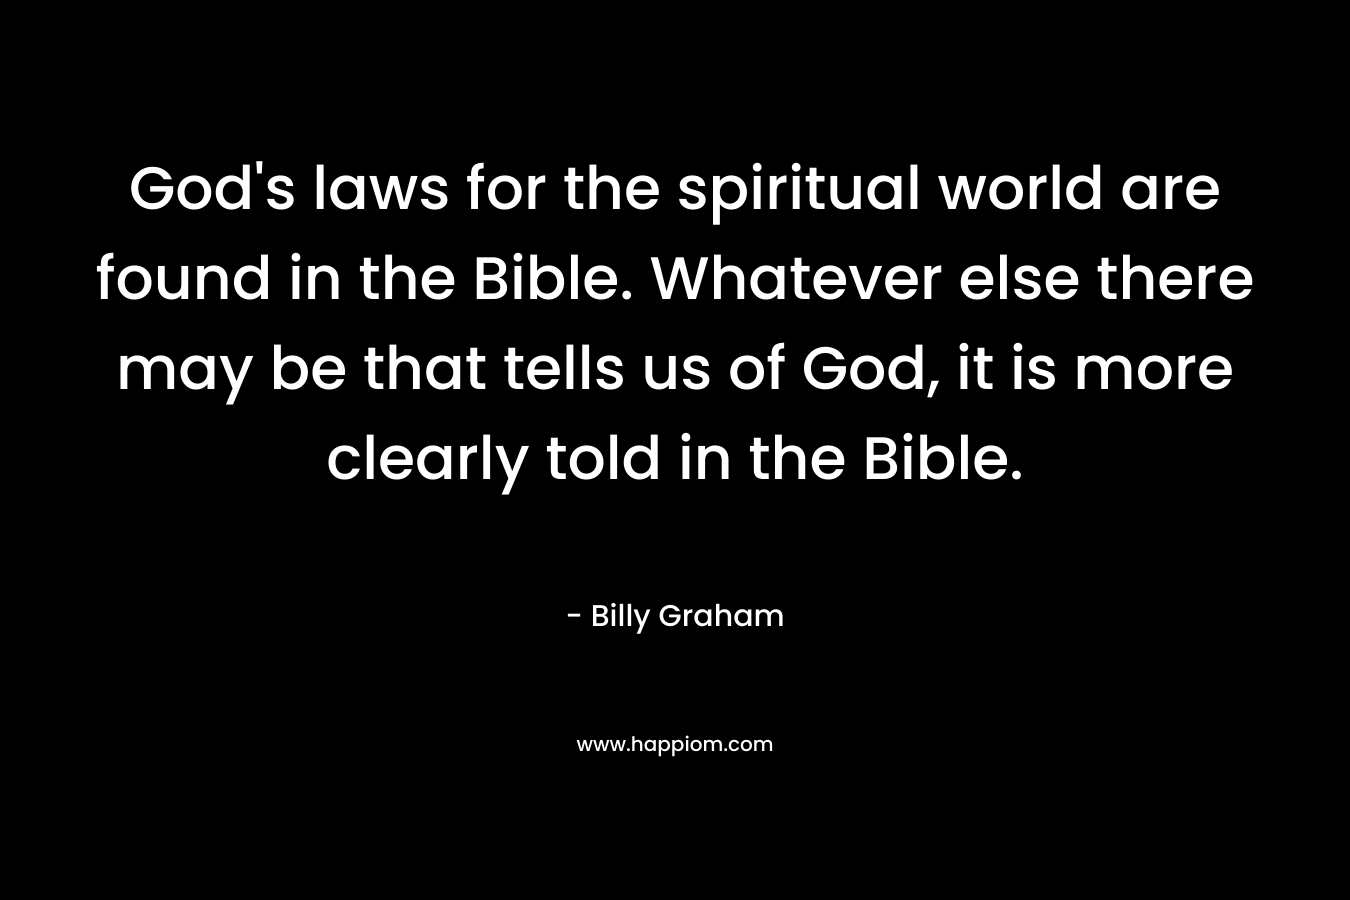 God's laws for the spiritual world are found in the Bible. Whatever else there may be that tells us of God, it is more clearly told in the Bible.